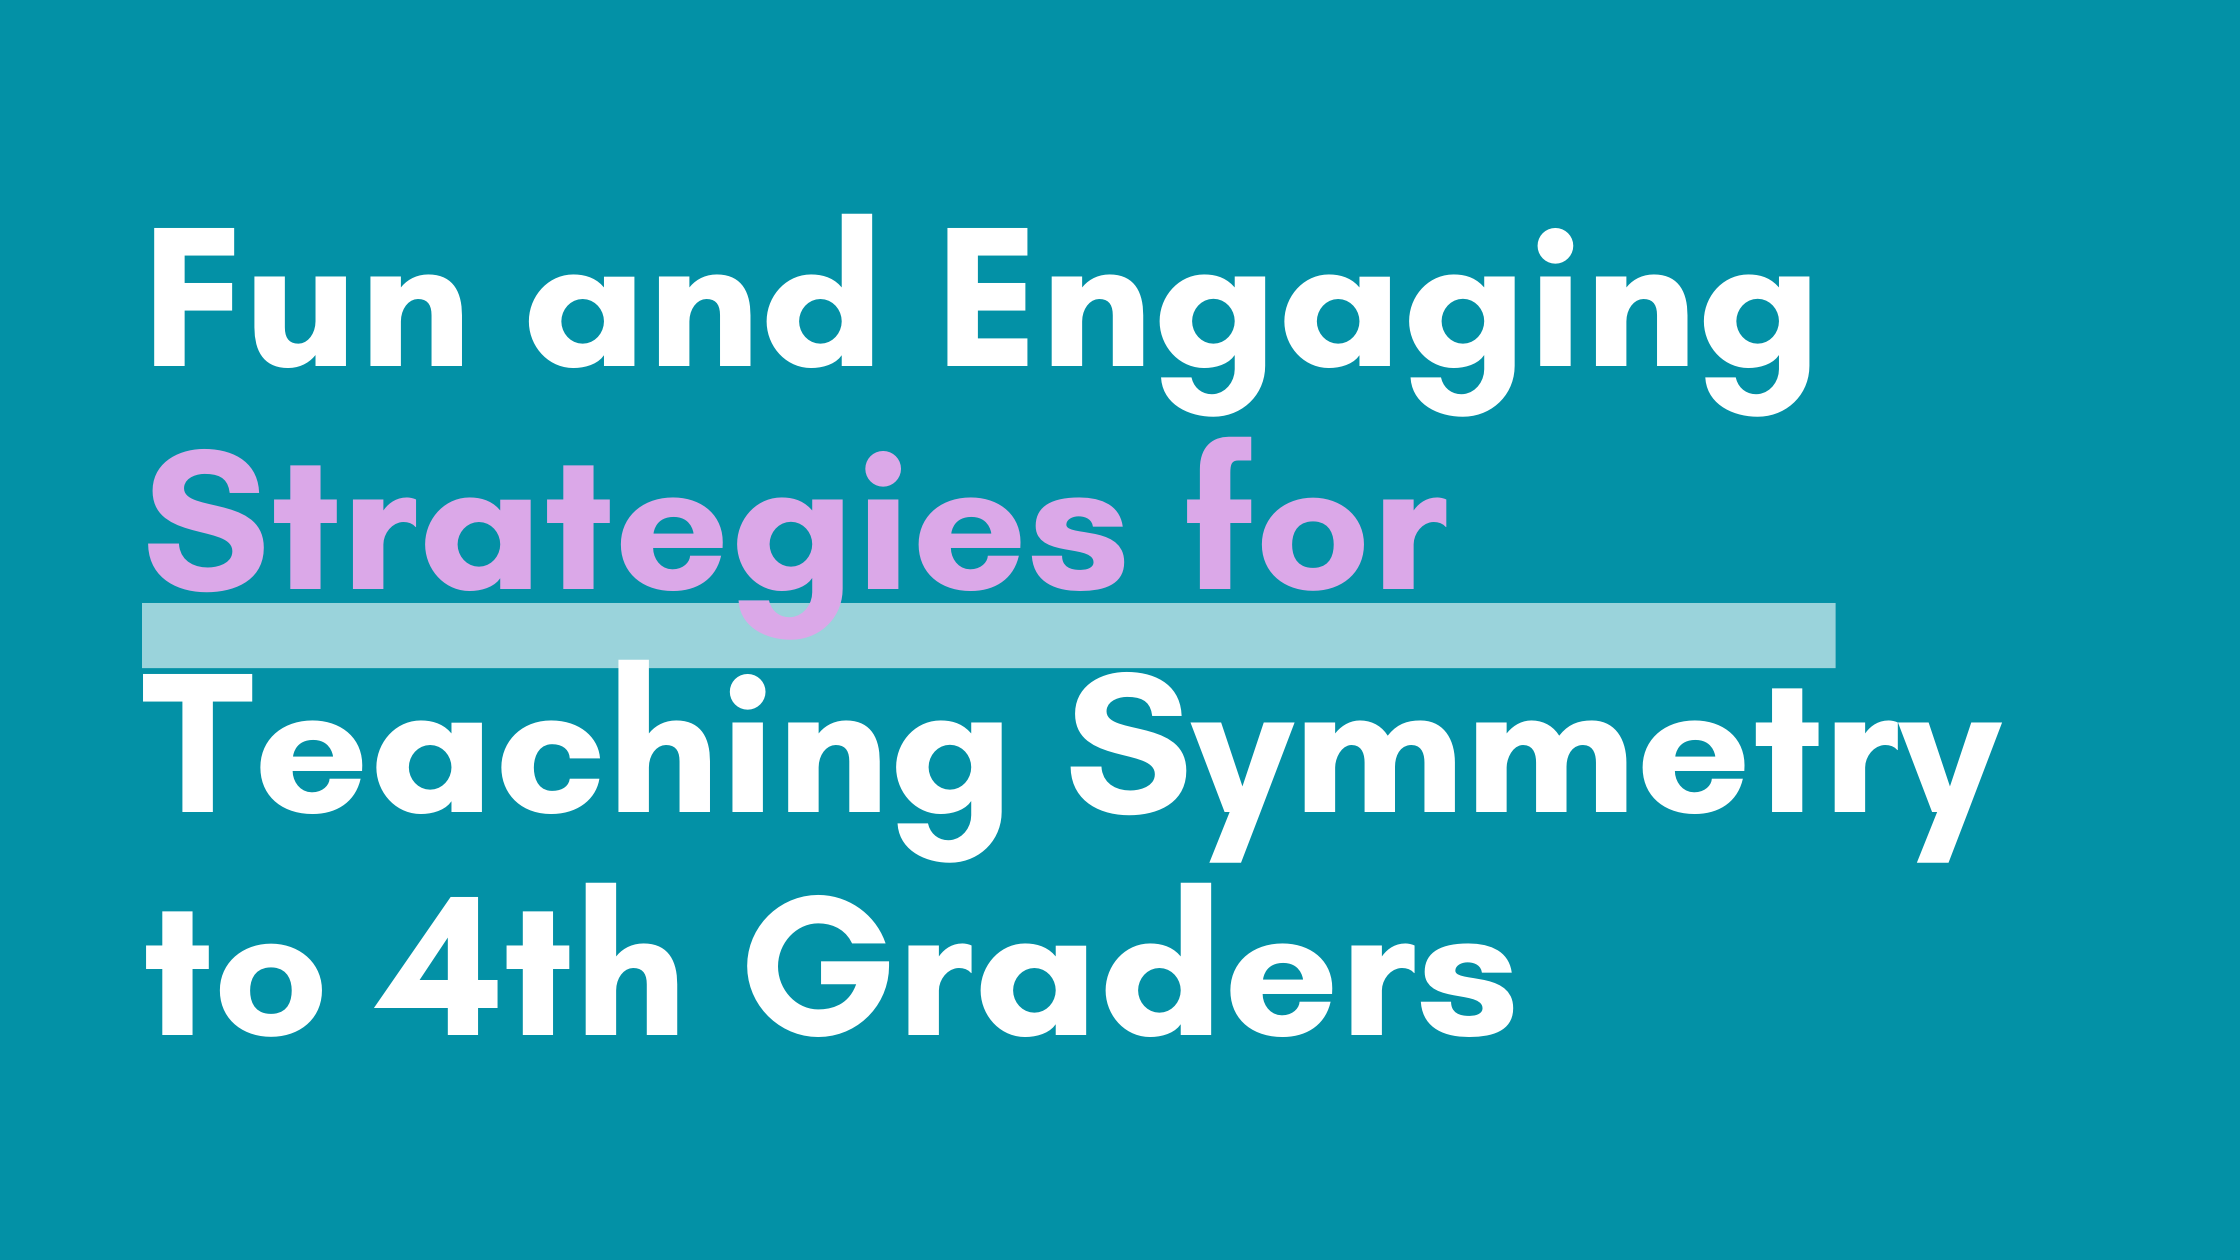 Fun and Engaging Strategies for Teaching Symmetry to 4th Graders Blog Post Header Image